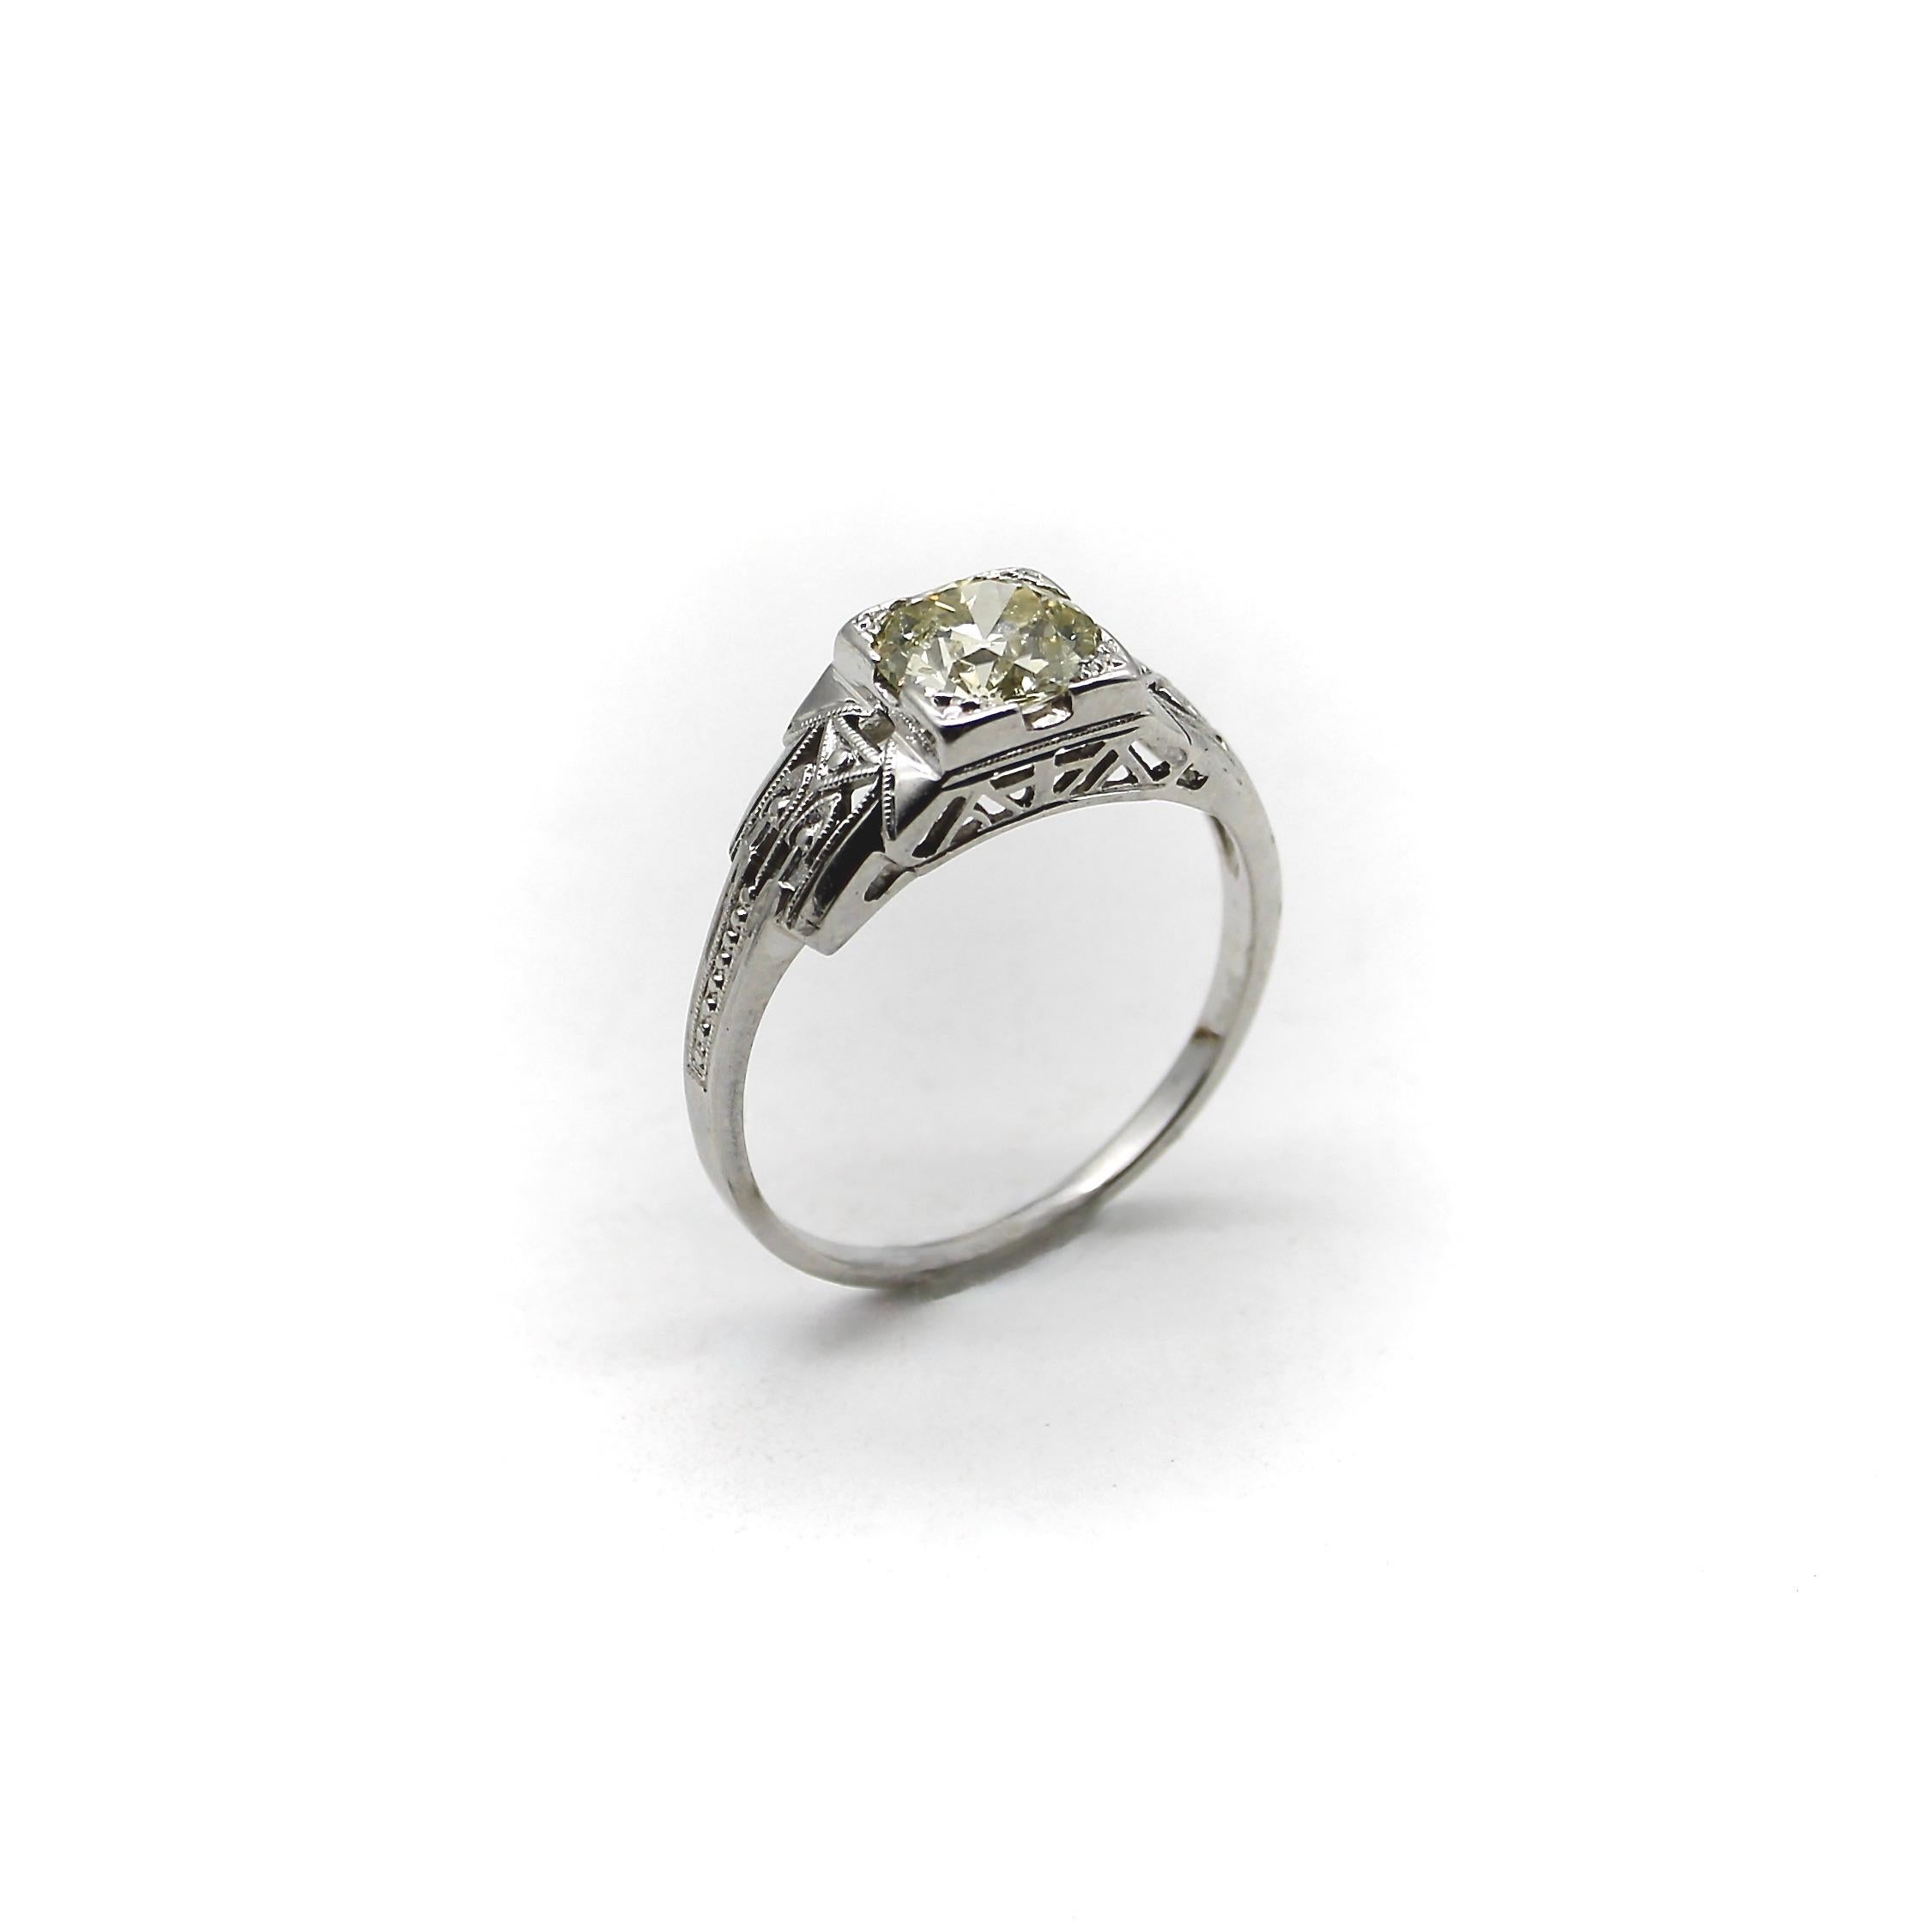 Circa 1920, this diamond engagement ring captures the transition from Edwardian filigree to the geometric and architectural details of Art Deco, incorporating both eras in its lovely design. The Old European cut diamond has a phenomenal sparkle